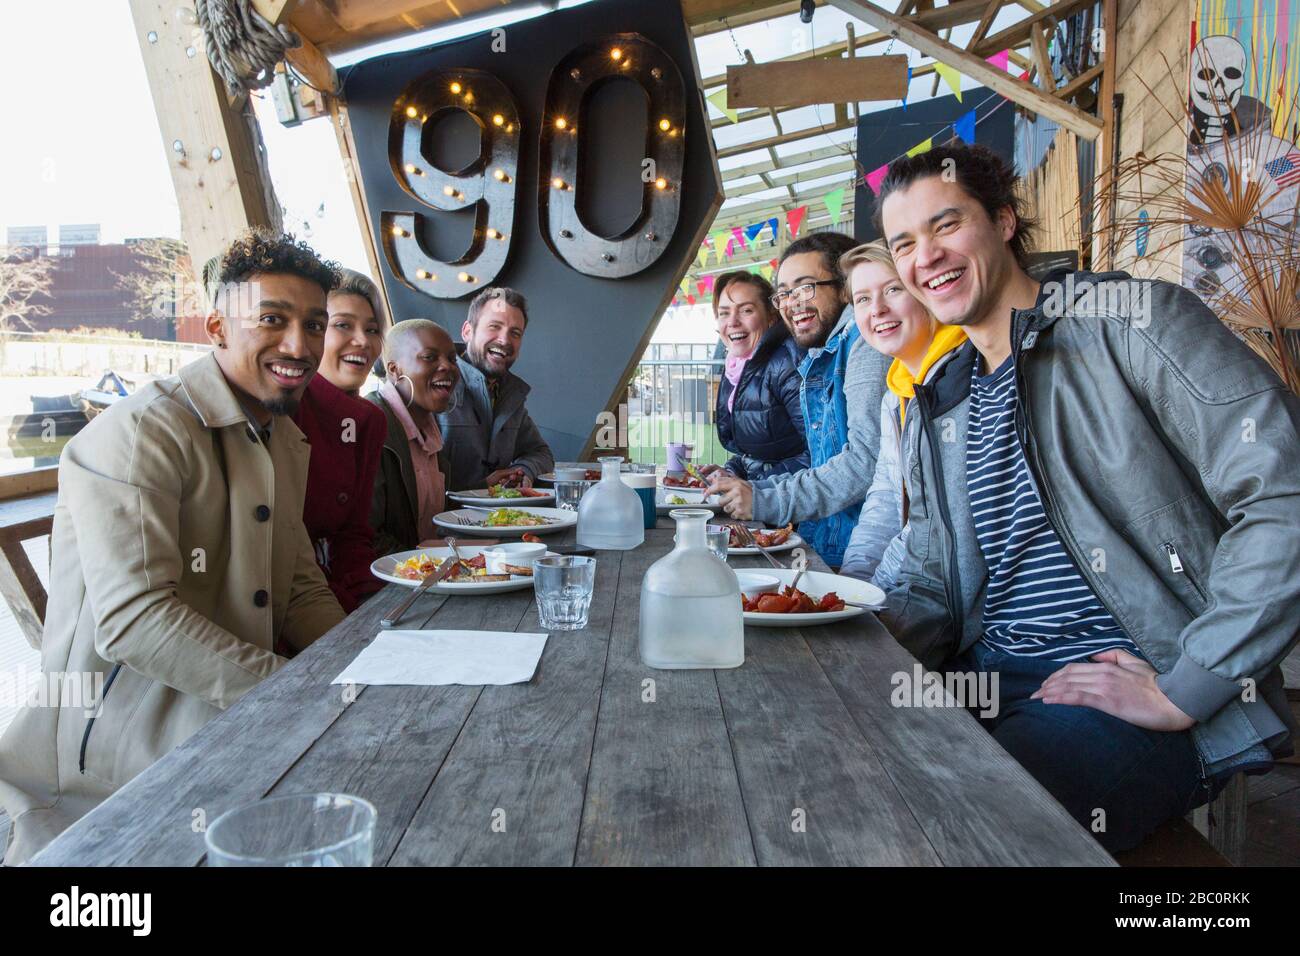 Portrait smiling friends eating at restaurant outdoor patio Stock Photo